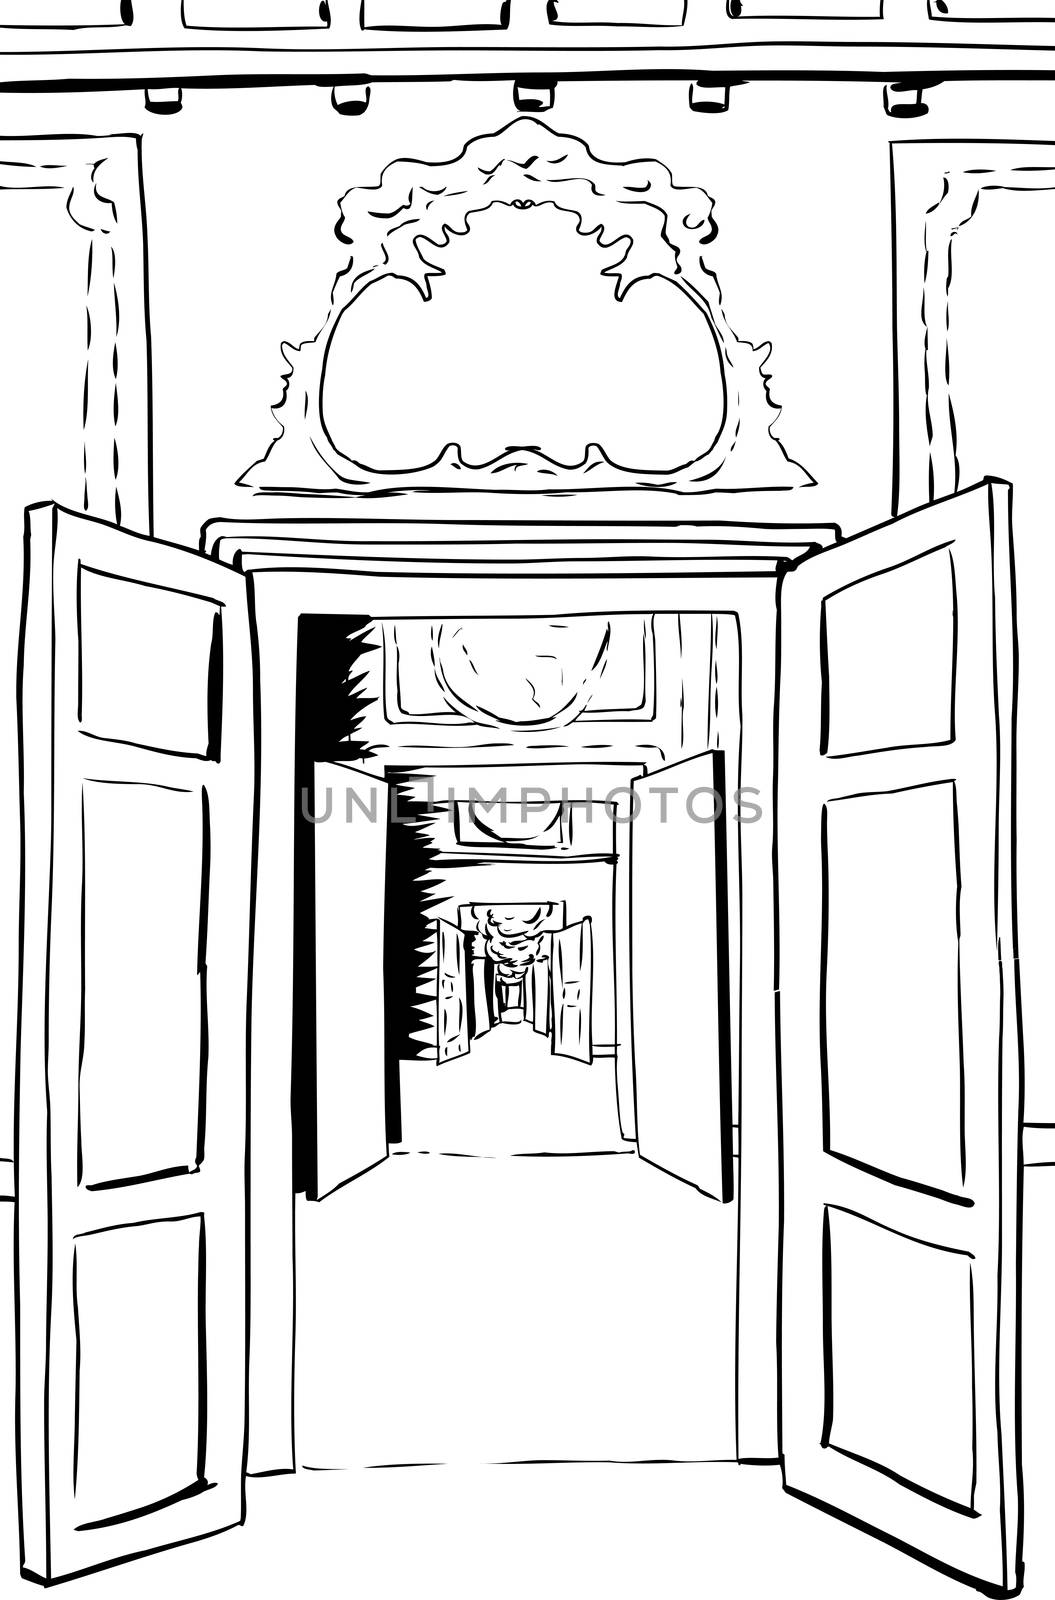 Outline of Doorways and Halls in Palace by TheBlackRhino